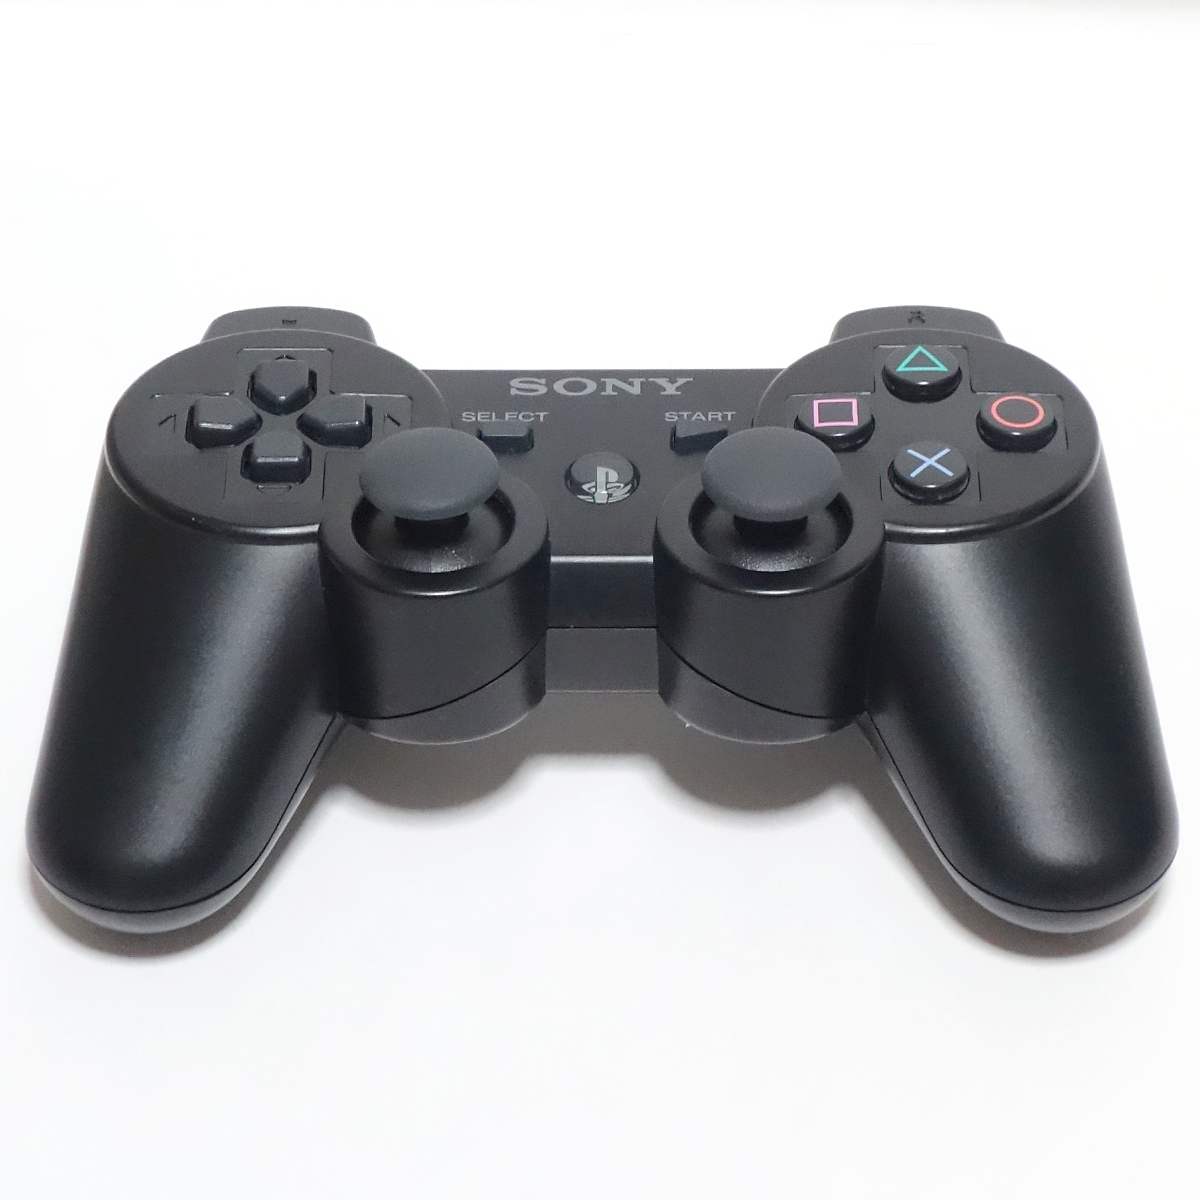 [ superior article ] Sony PS3 for original wireless controller DUALSHOCK3(CECHZC2J)*SONY PlayStation3/ PlayStation 3